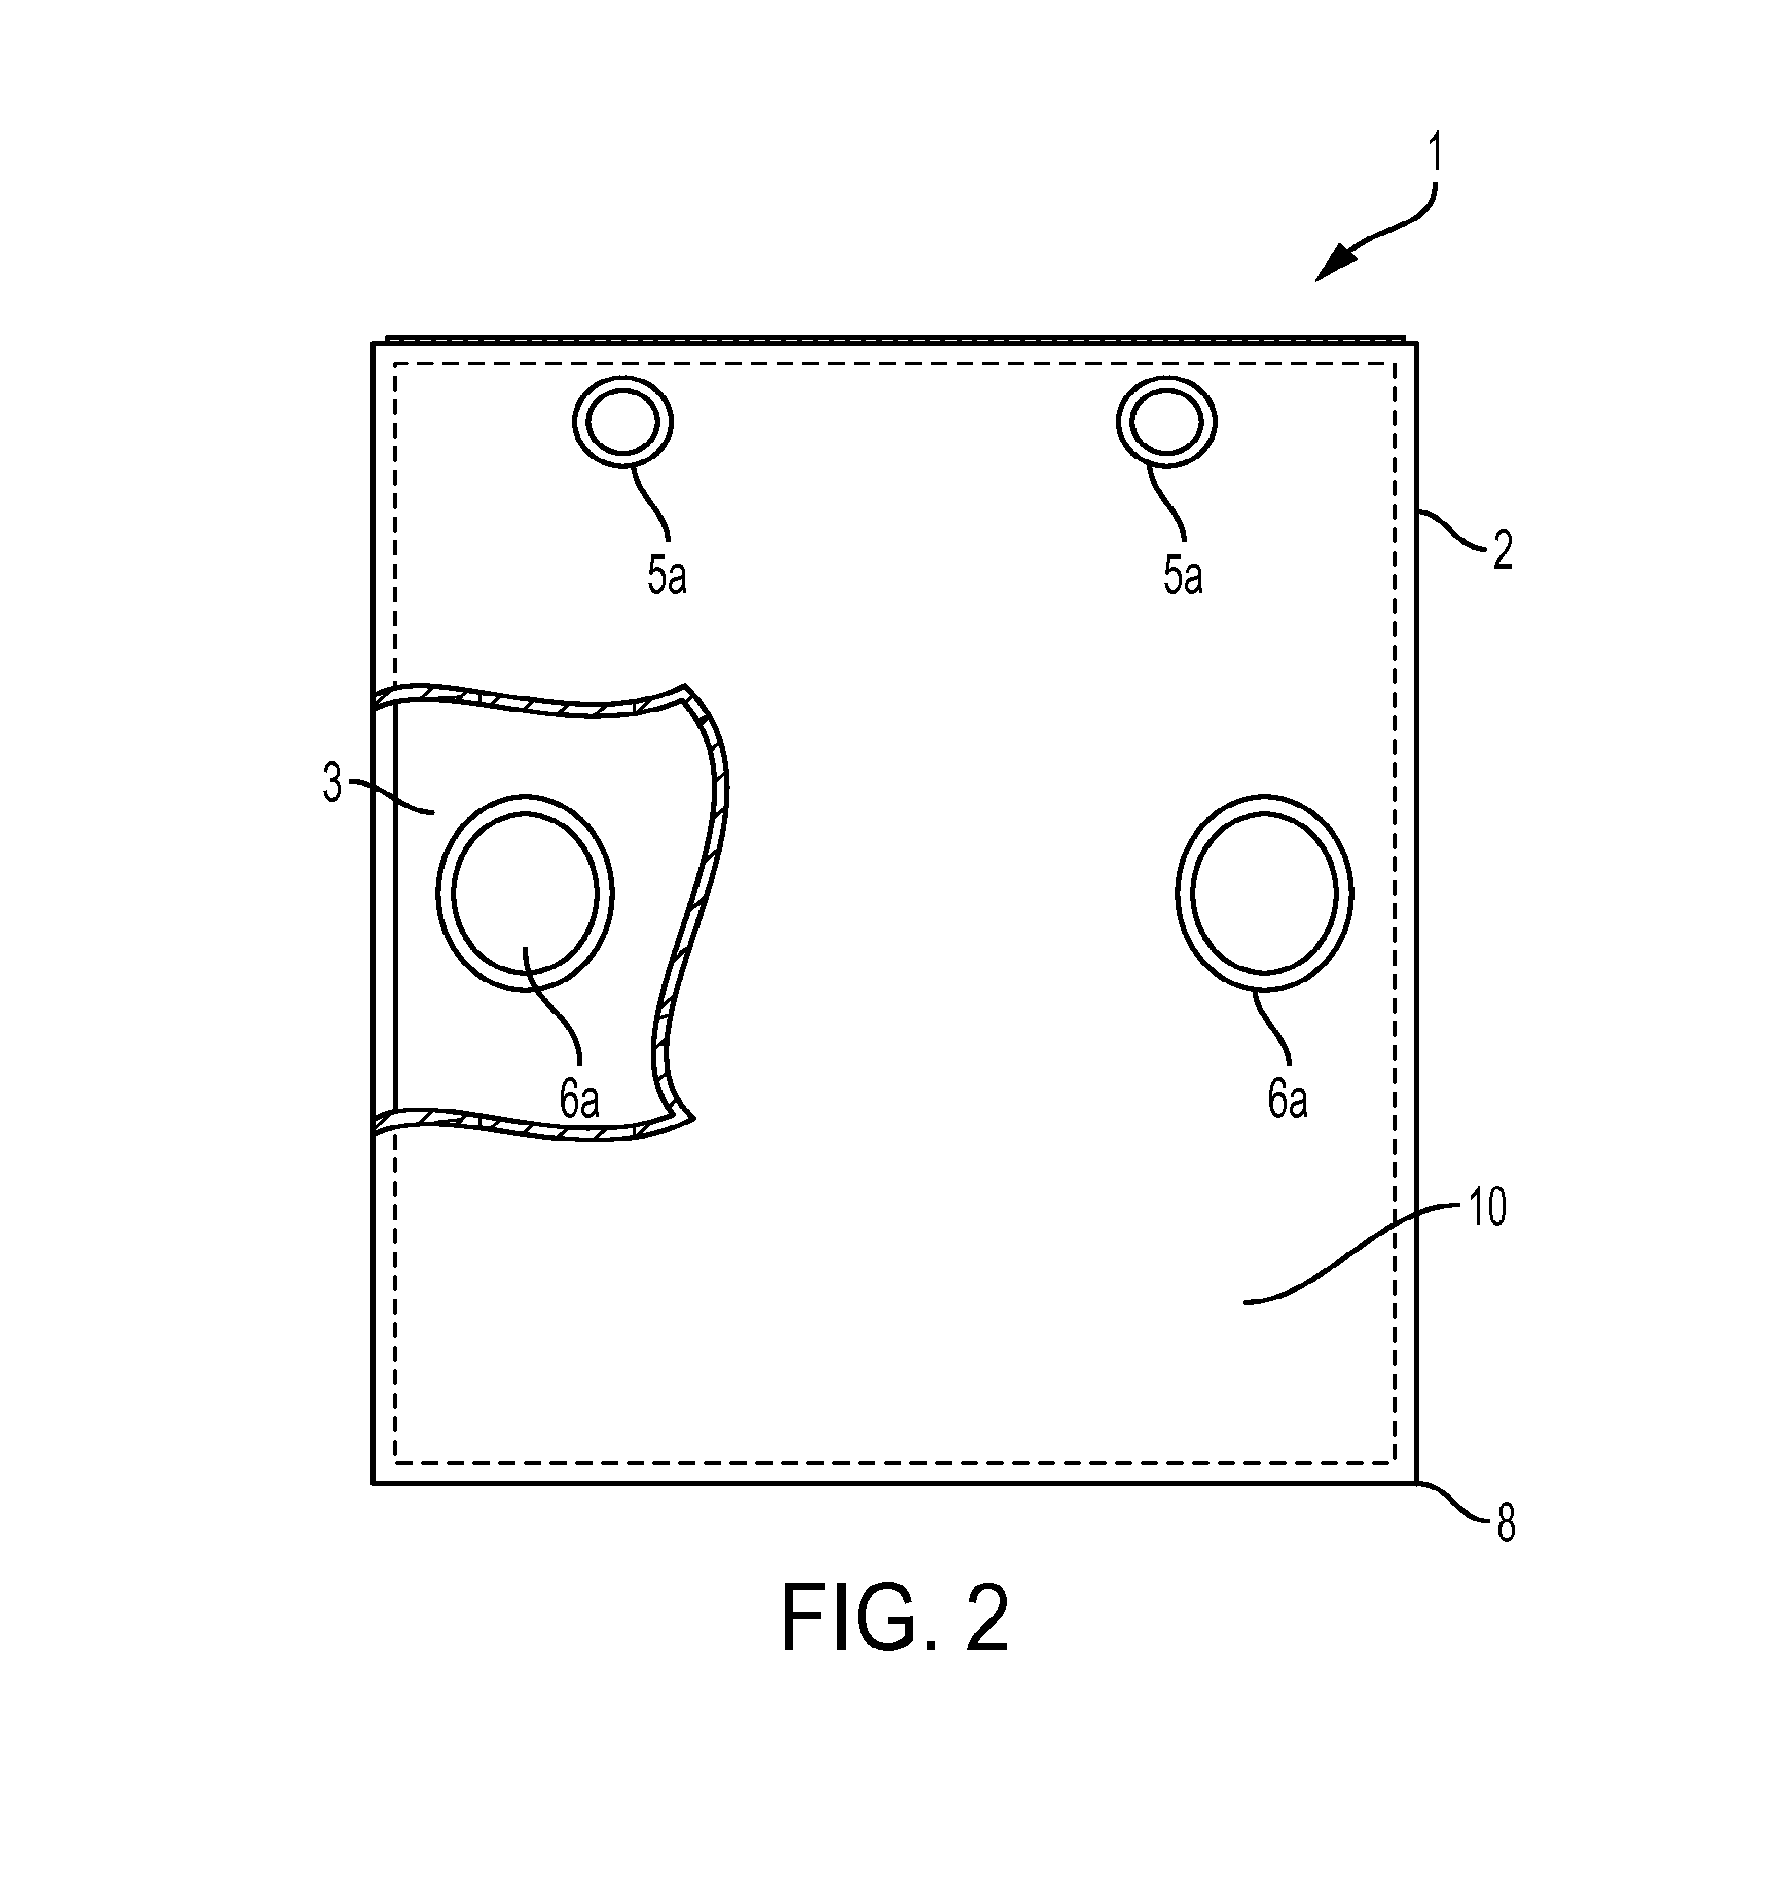 Portable bag having integrated handling openings and improved volumetric characteristics and assembly for use therewith